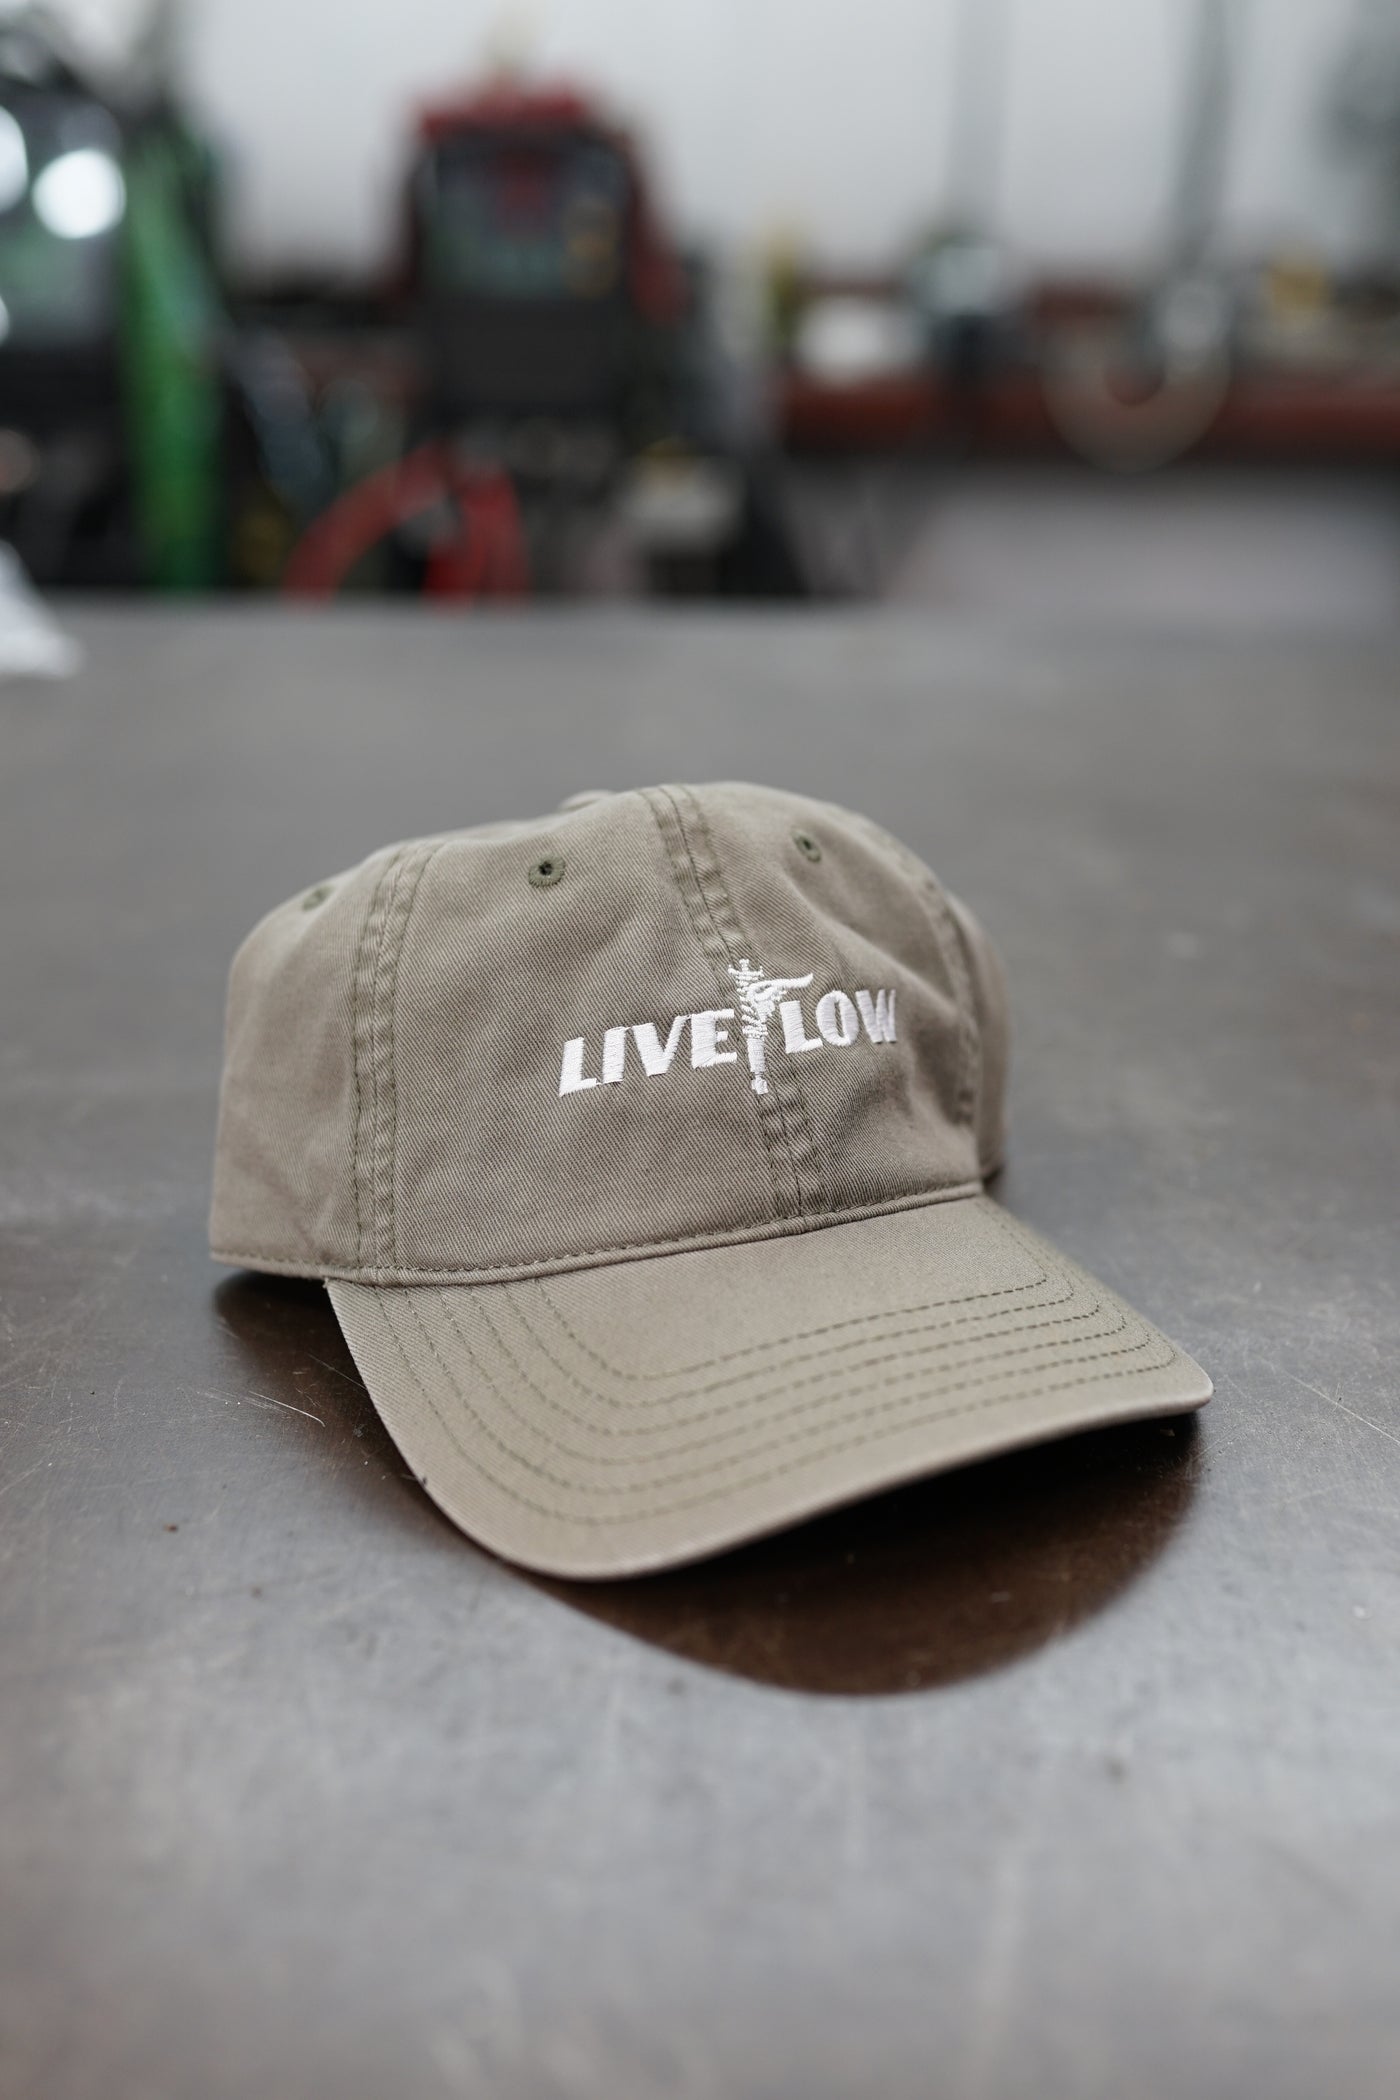 Live Low Winged Hat - Dusty Olive